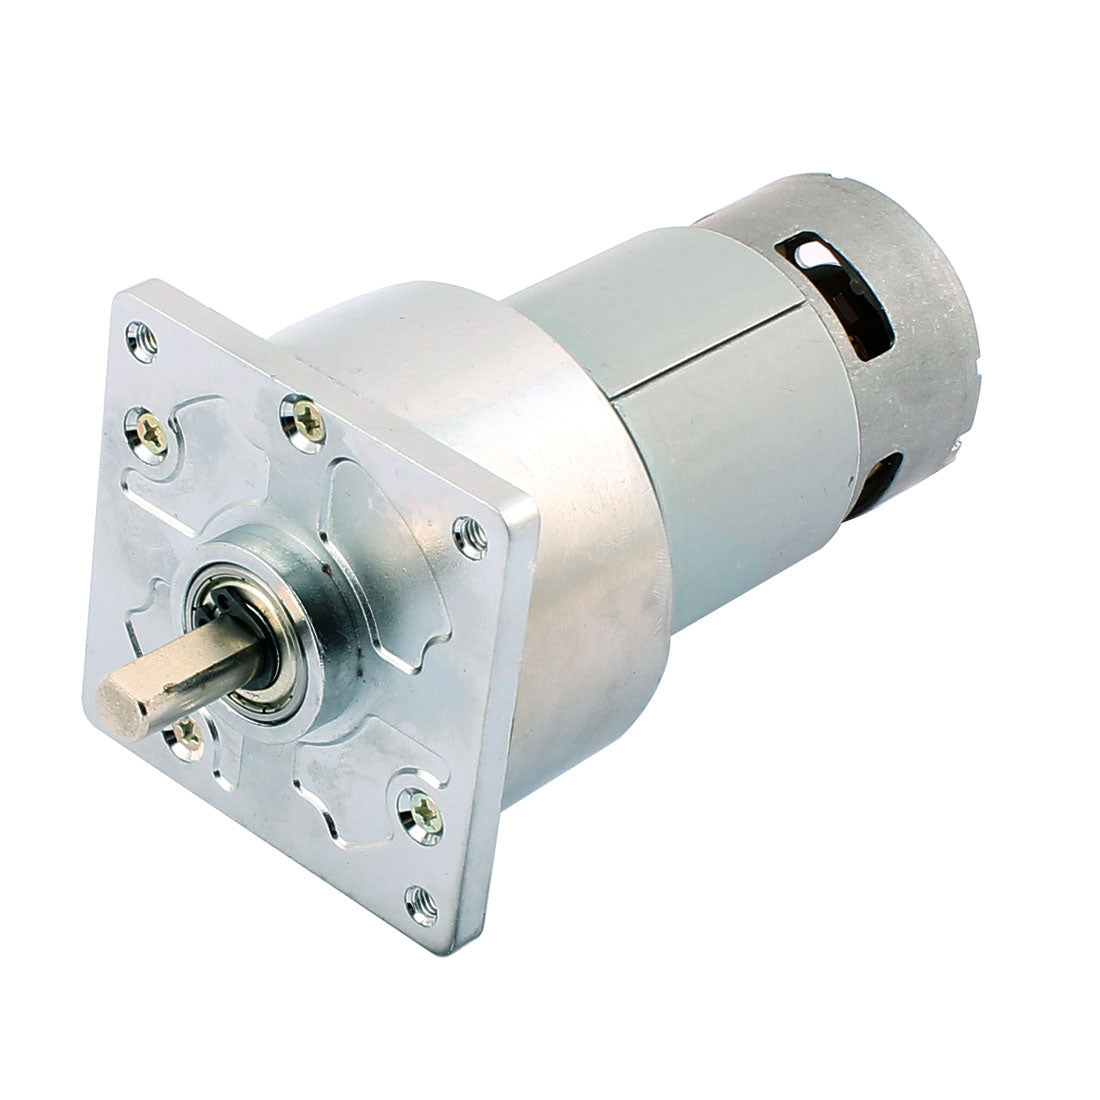 uxcell Uxcell TJZ60FT76i DC 24V 45RPM High Torque Electric Low Speed Solder Gear Box Motor